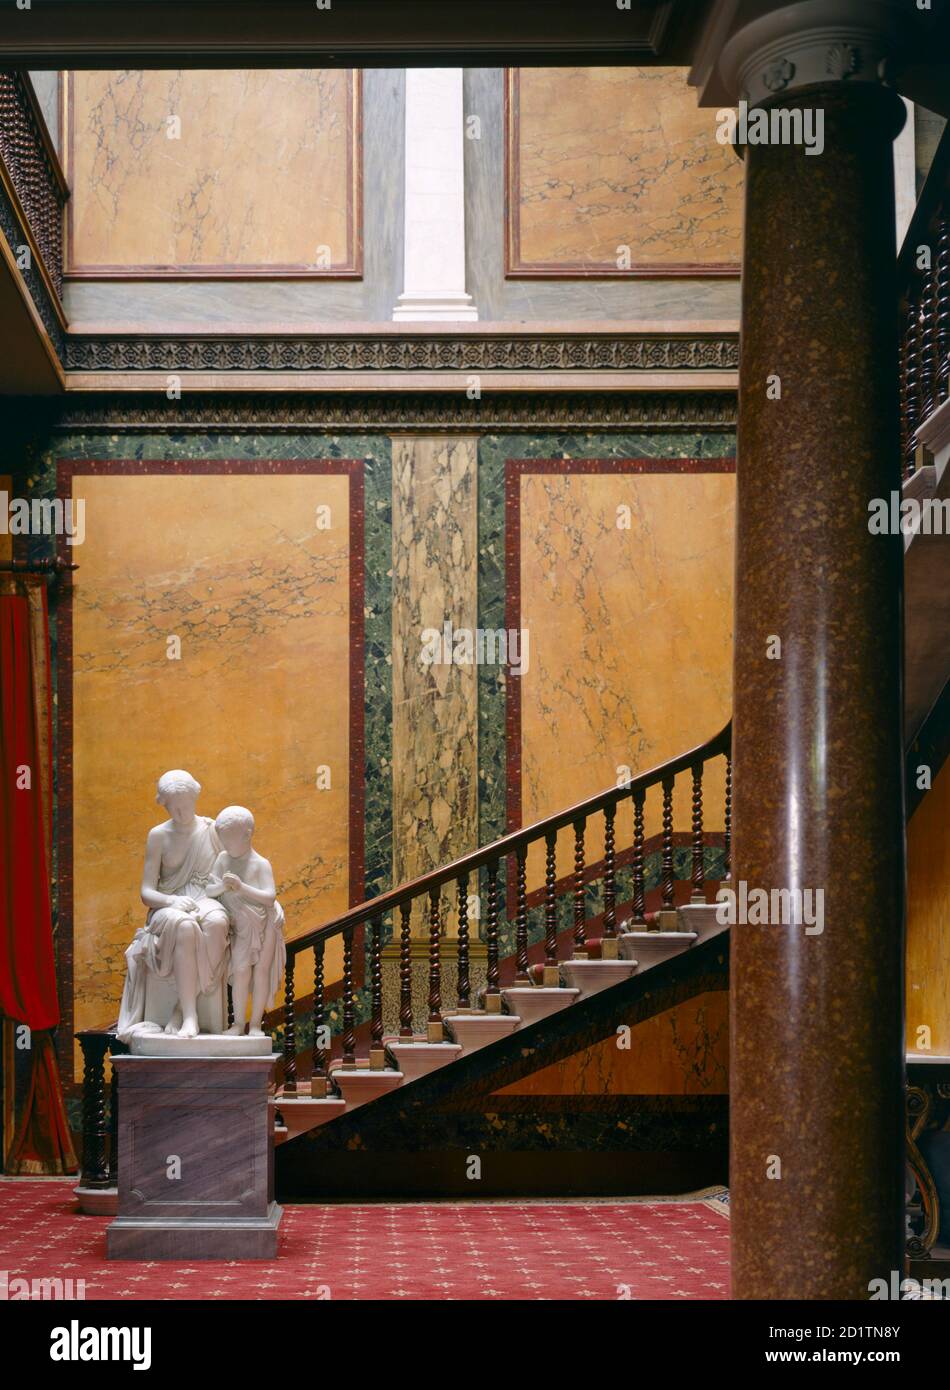 BRODSWORTH HALL, South Yorkshire. Interior view. Inner Hall. Staircase and statuary. Stock Photo